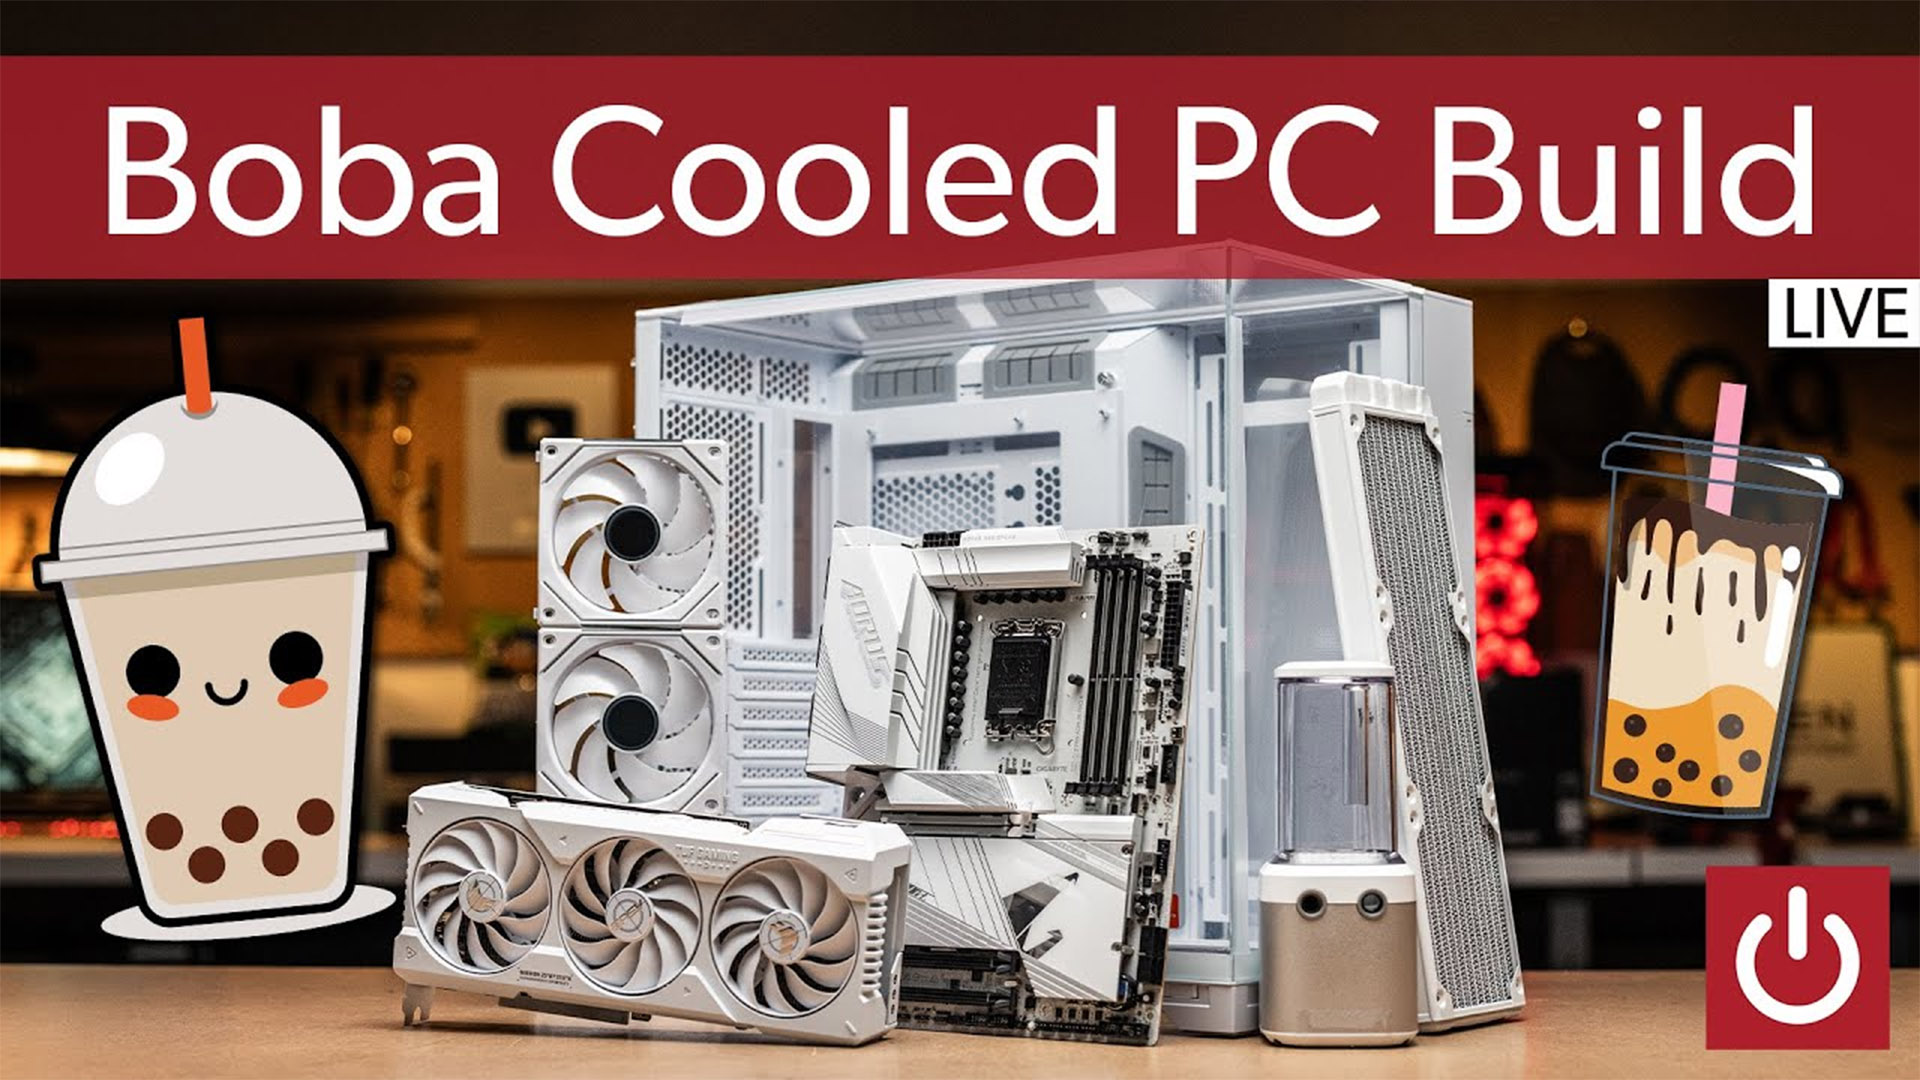 Watch PCWorld build a boba tea-cooled gaming rig